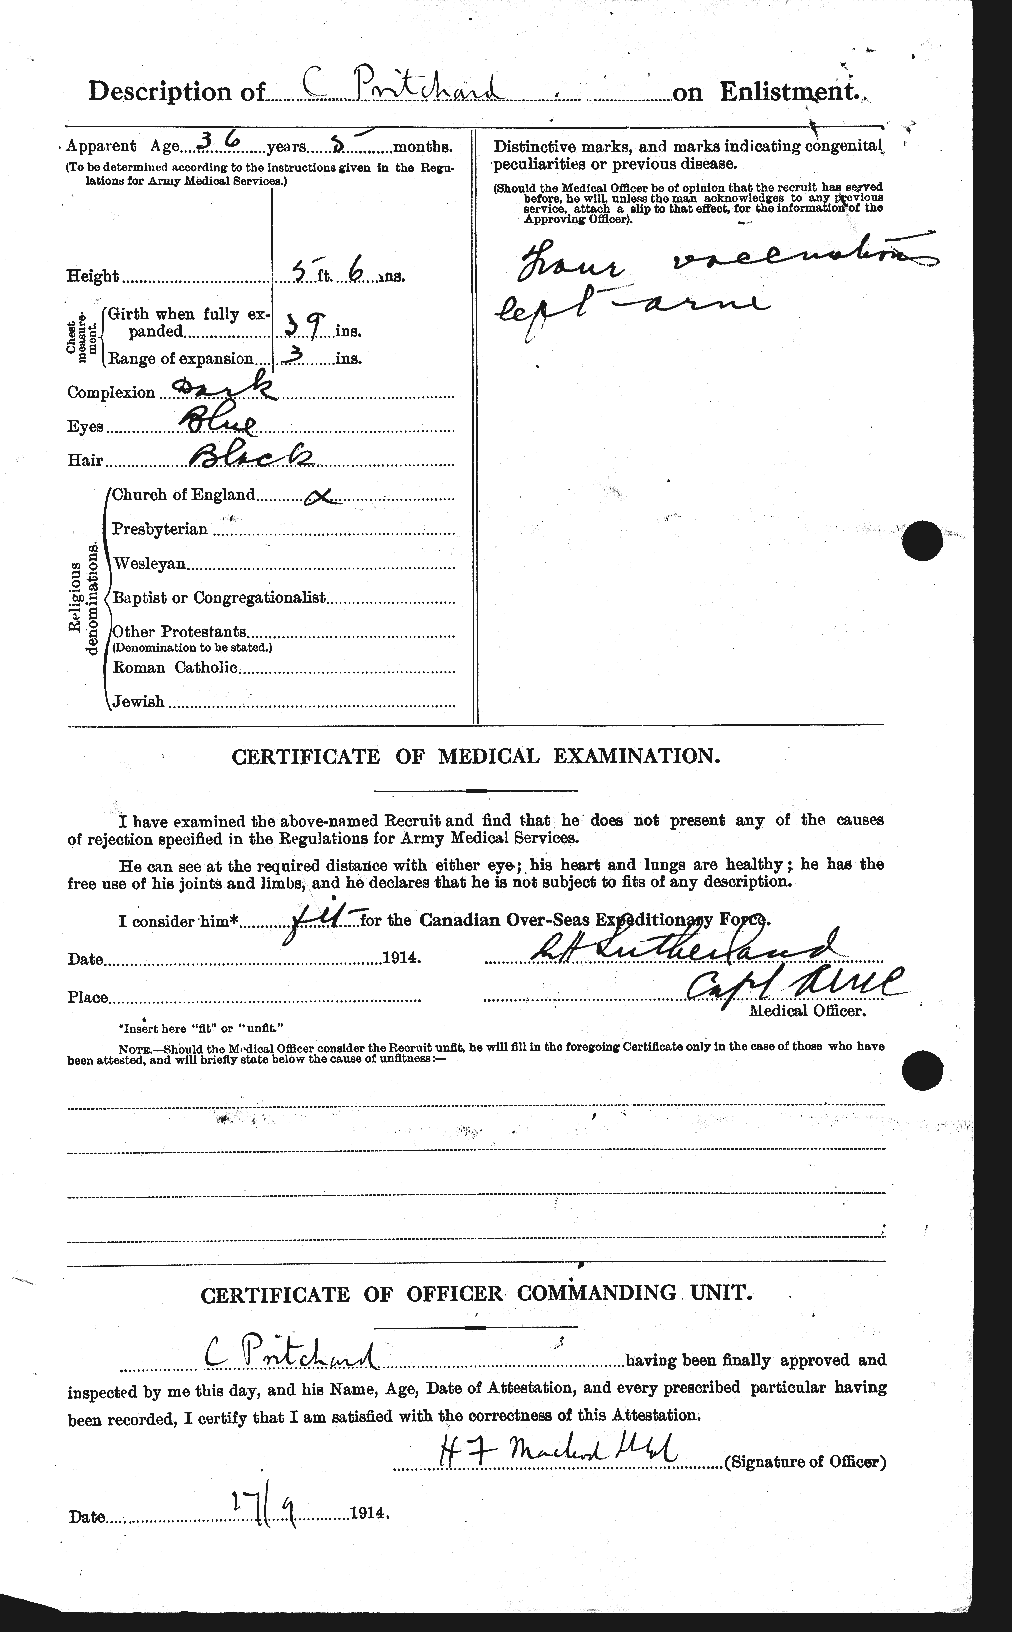 Personnel Records of the First World War - CEF 588493b